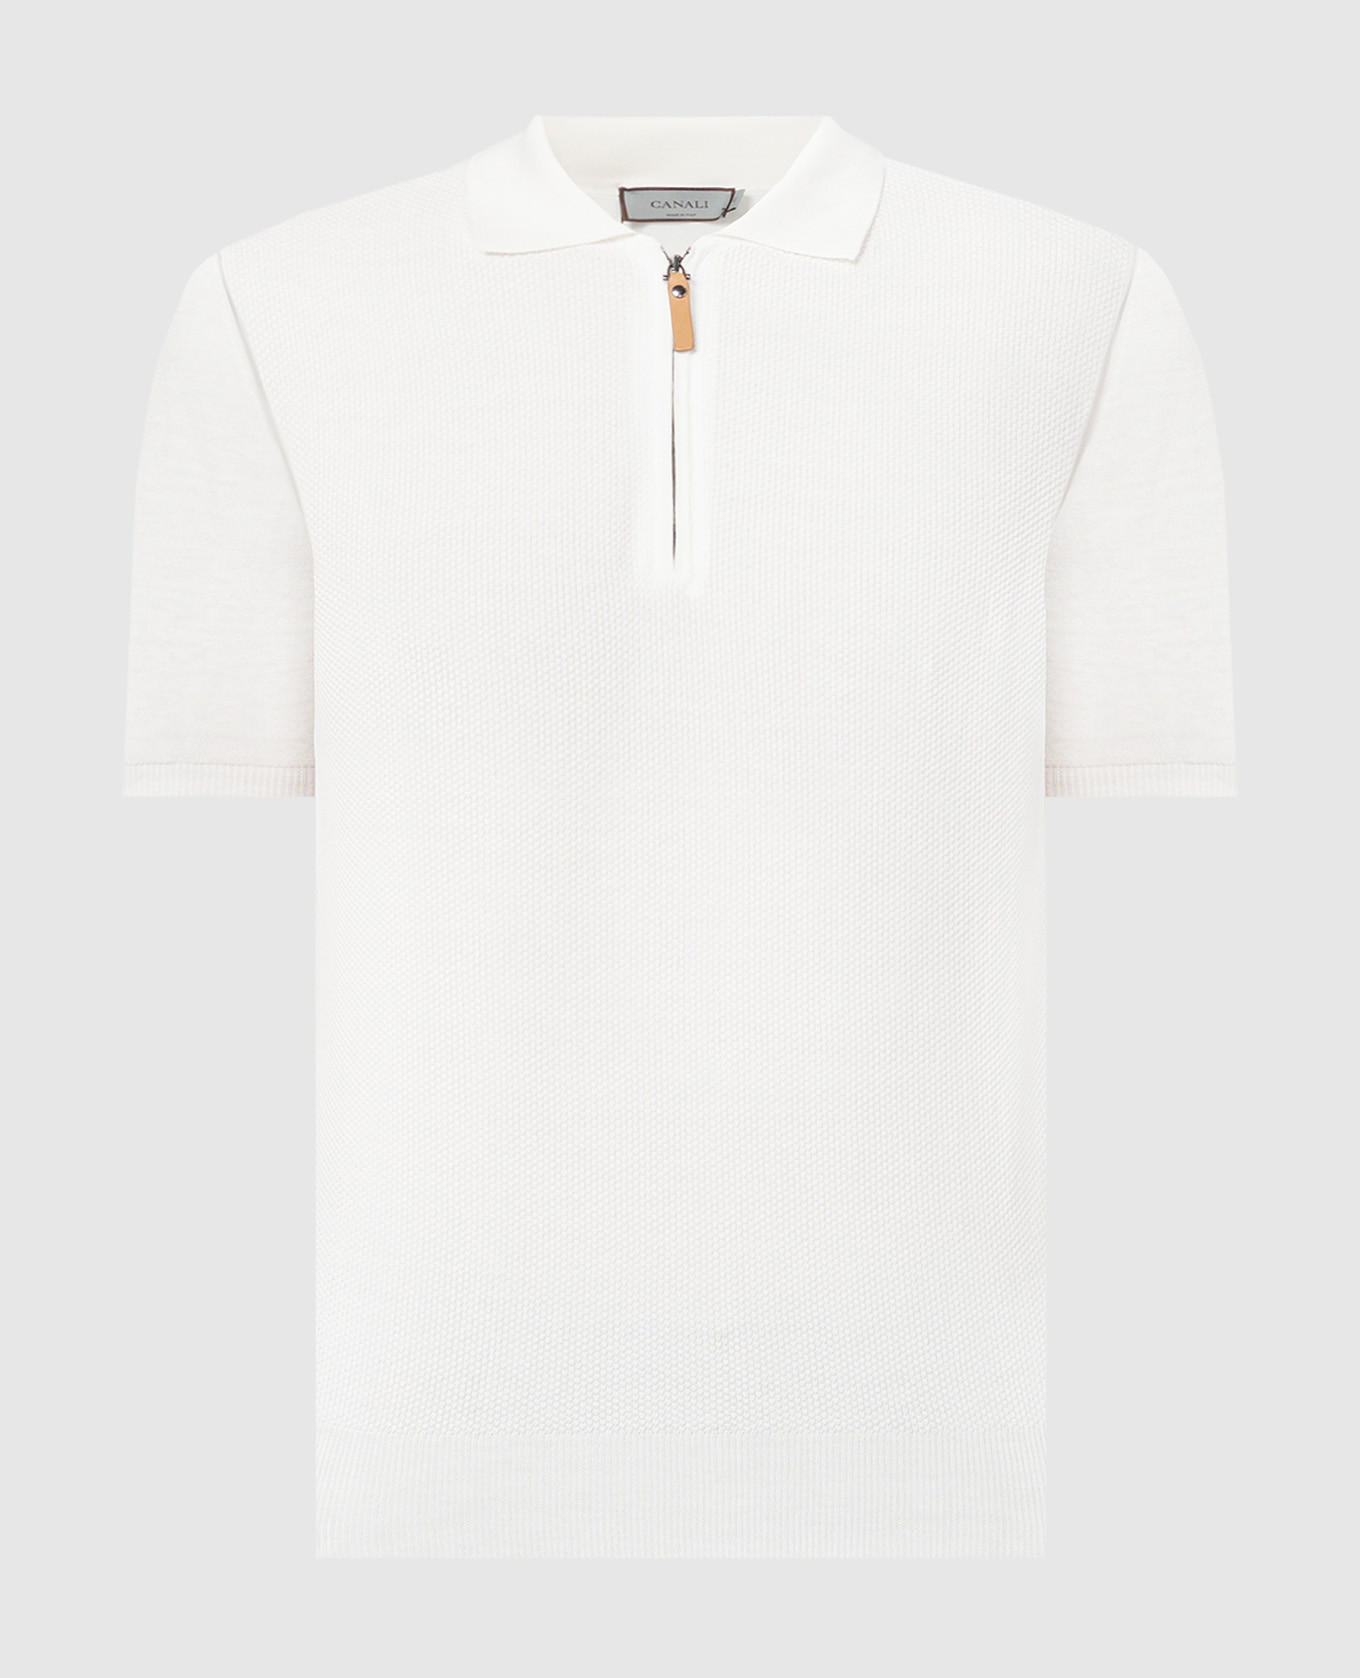 White polo in a woven pattern